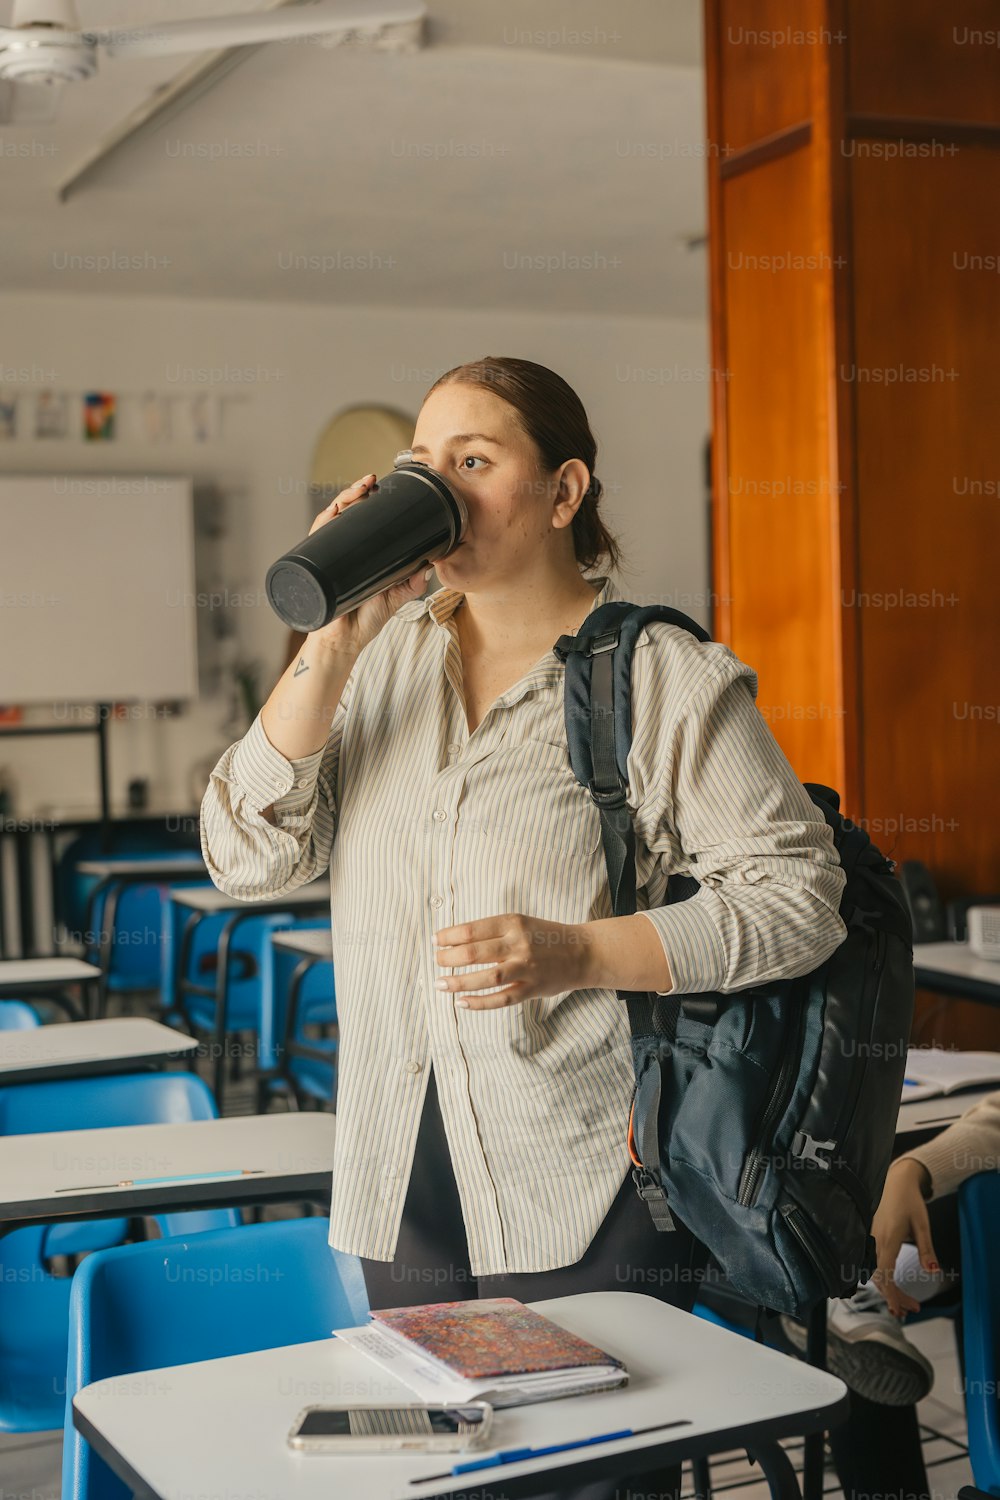 a woman standing in a classroom drinking from a cup